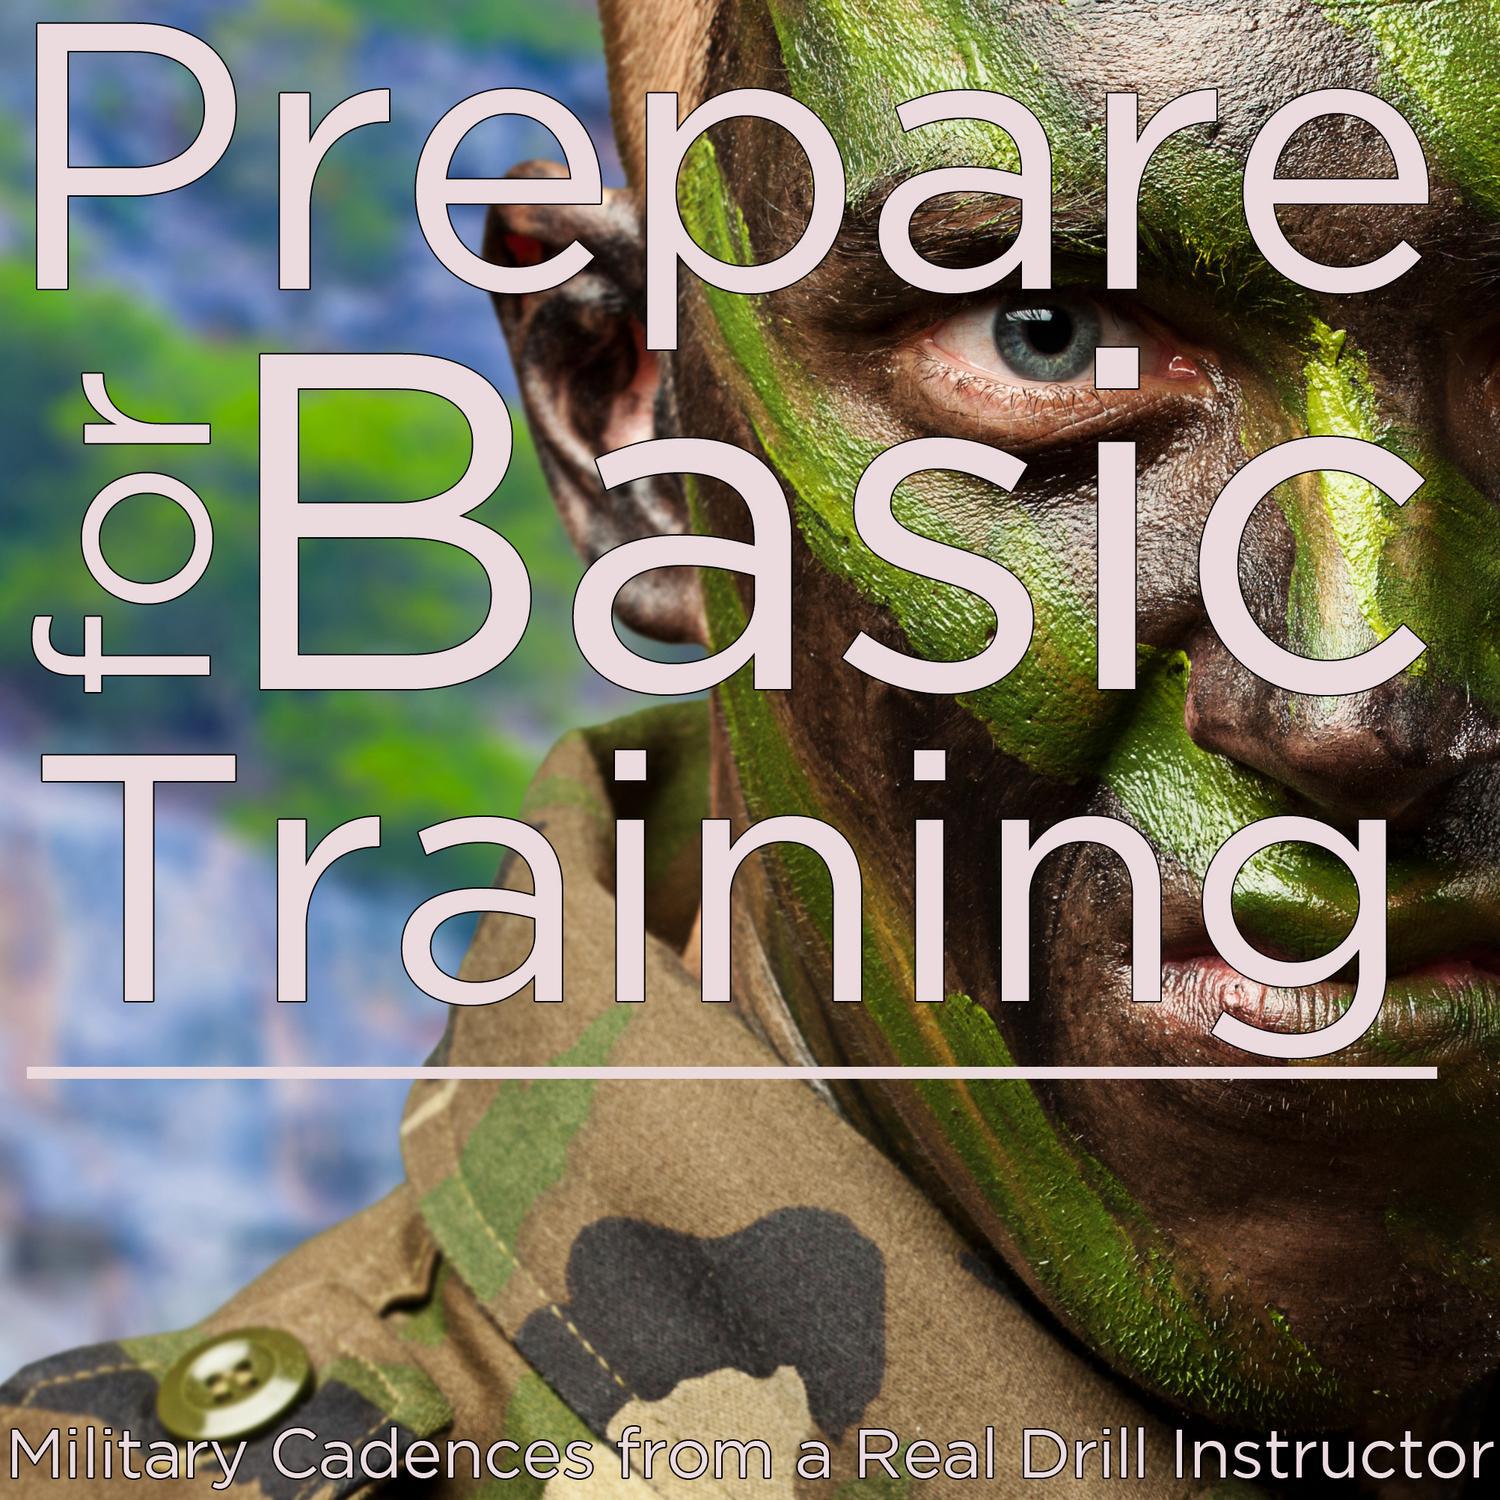 Prepare for Basic Training: Military Cadences from a Real Drill Instructor